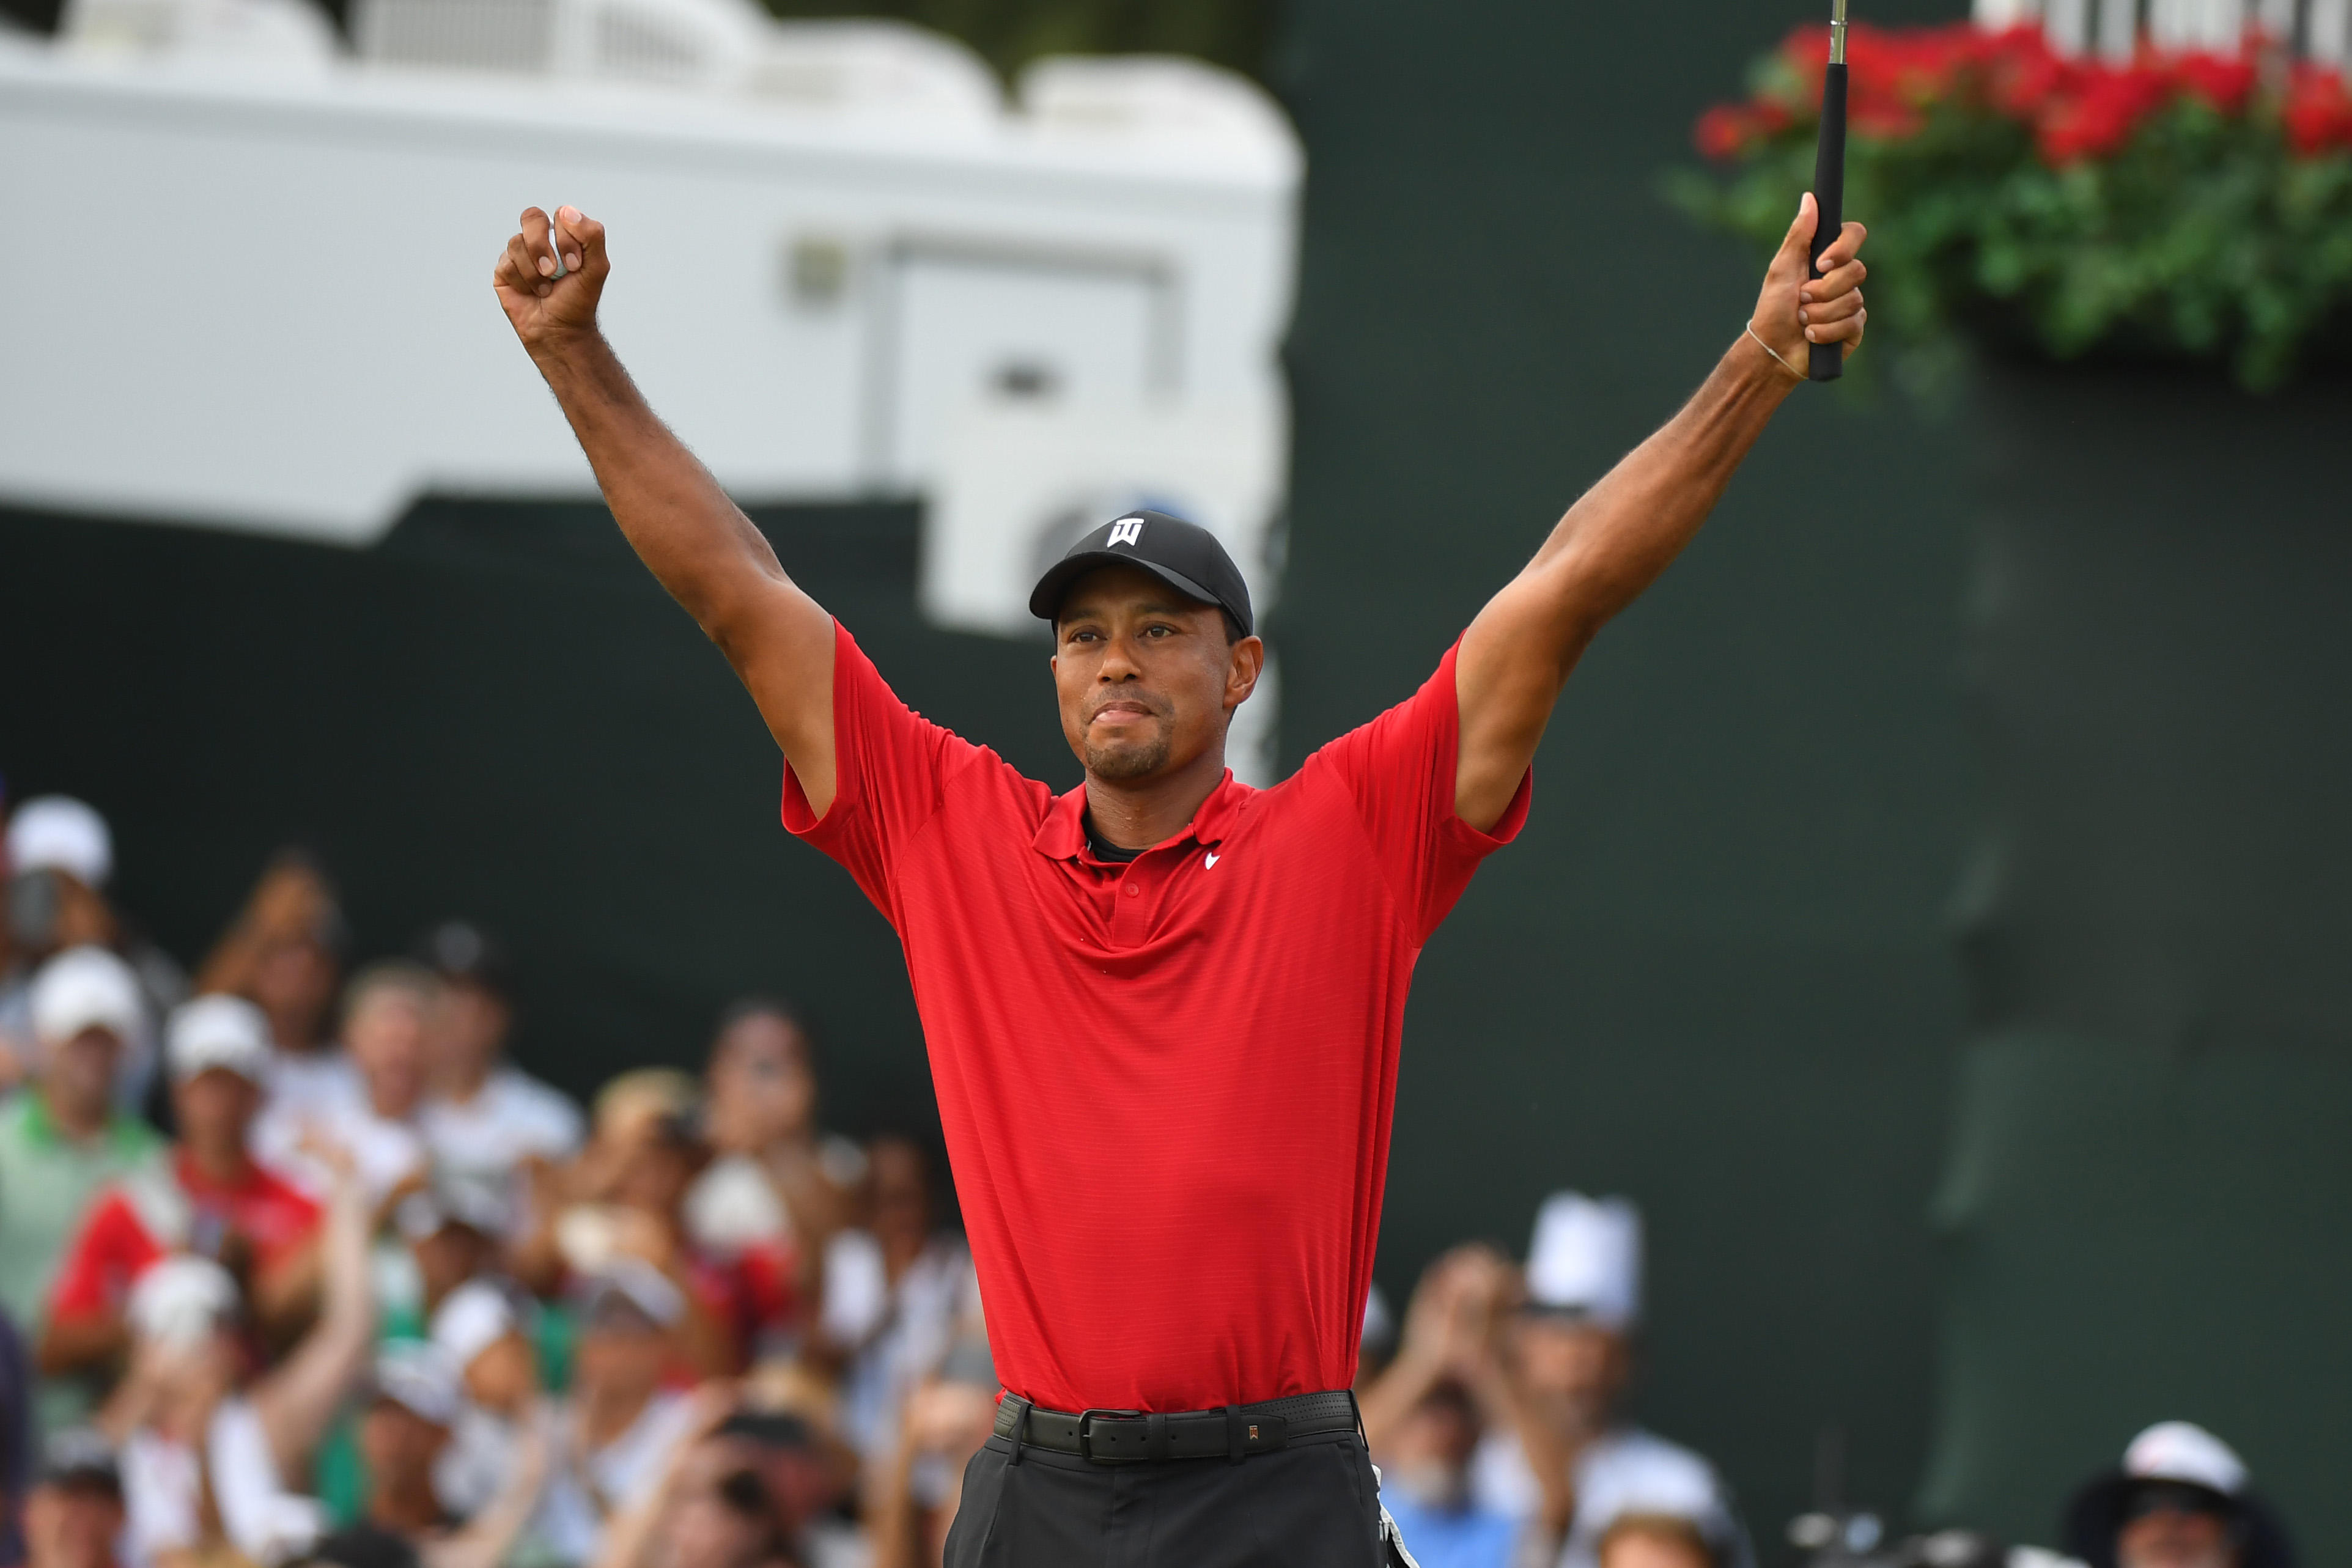 Tiger Woods Tour Championship win today is his first since 2013; PGA